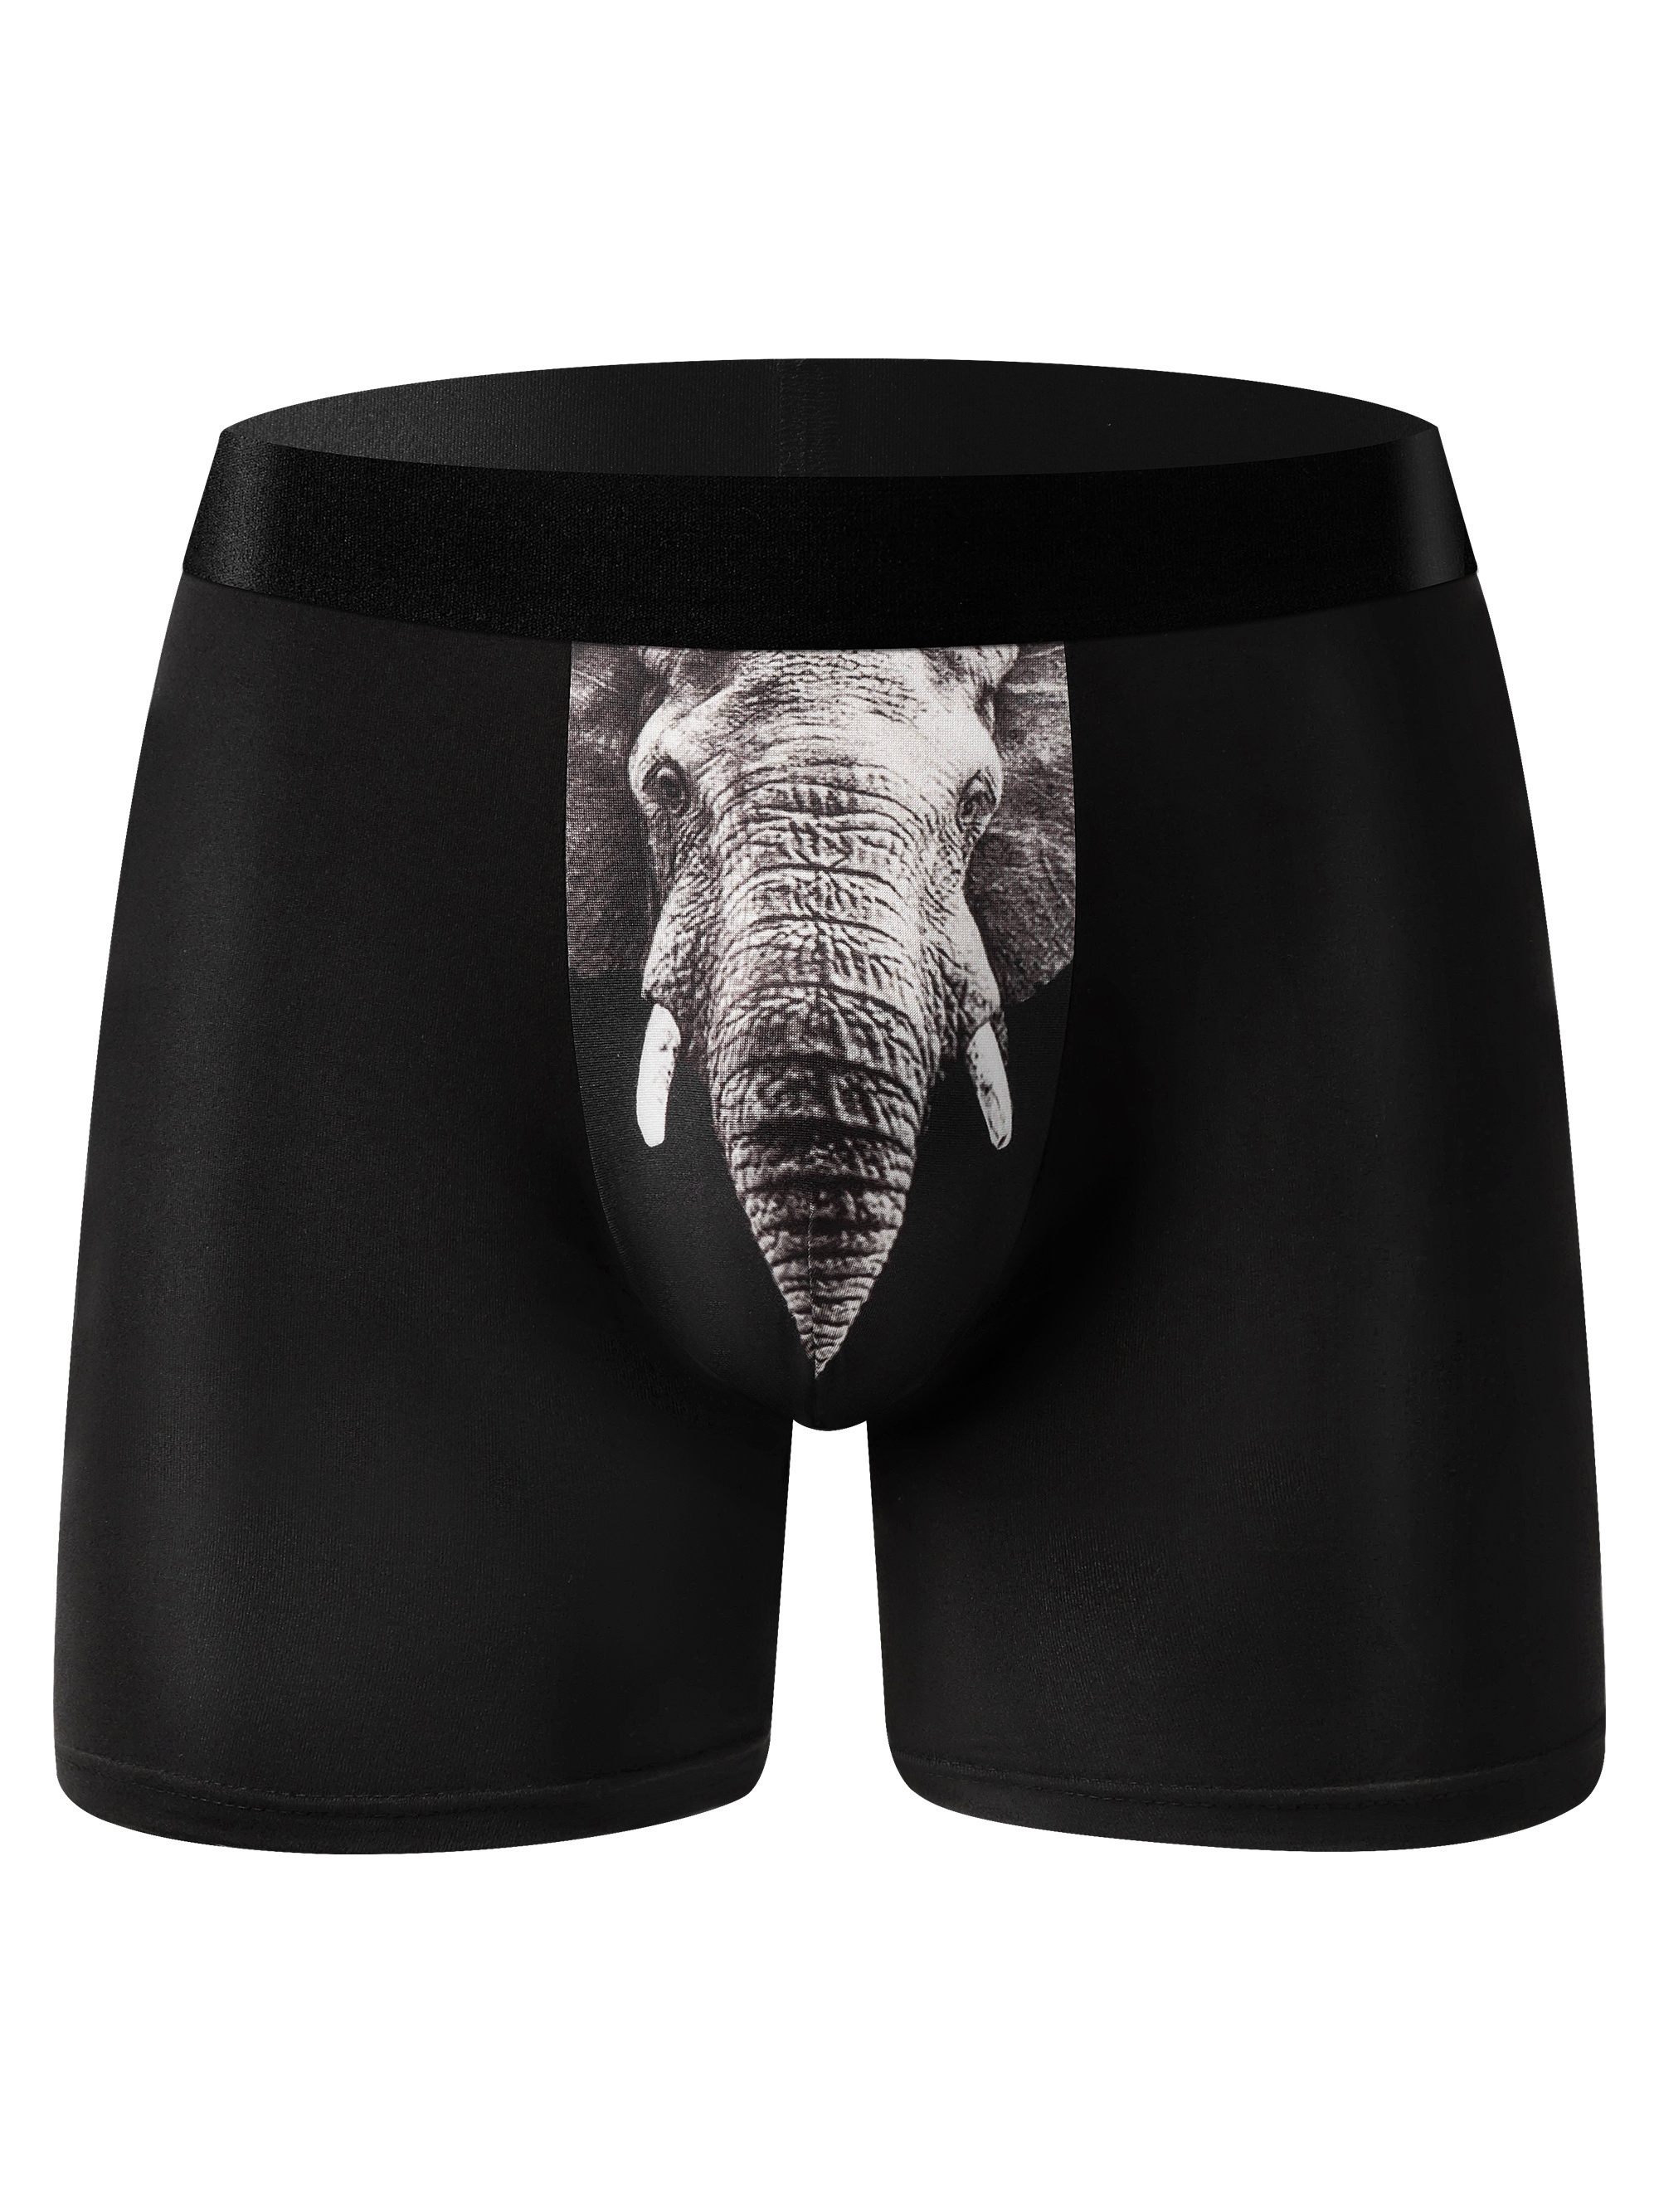 1pc Elephant Graphic Print Men's Long-style Underwear, Comfortable And  Breathable Elastic Boxer Shorts, Men's Novelty Underwear, Running Sports  Fitnes